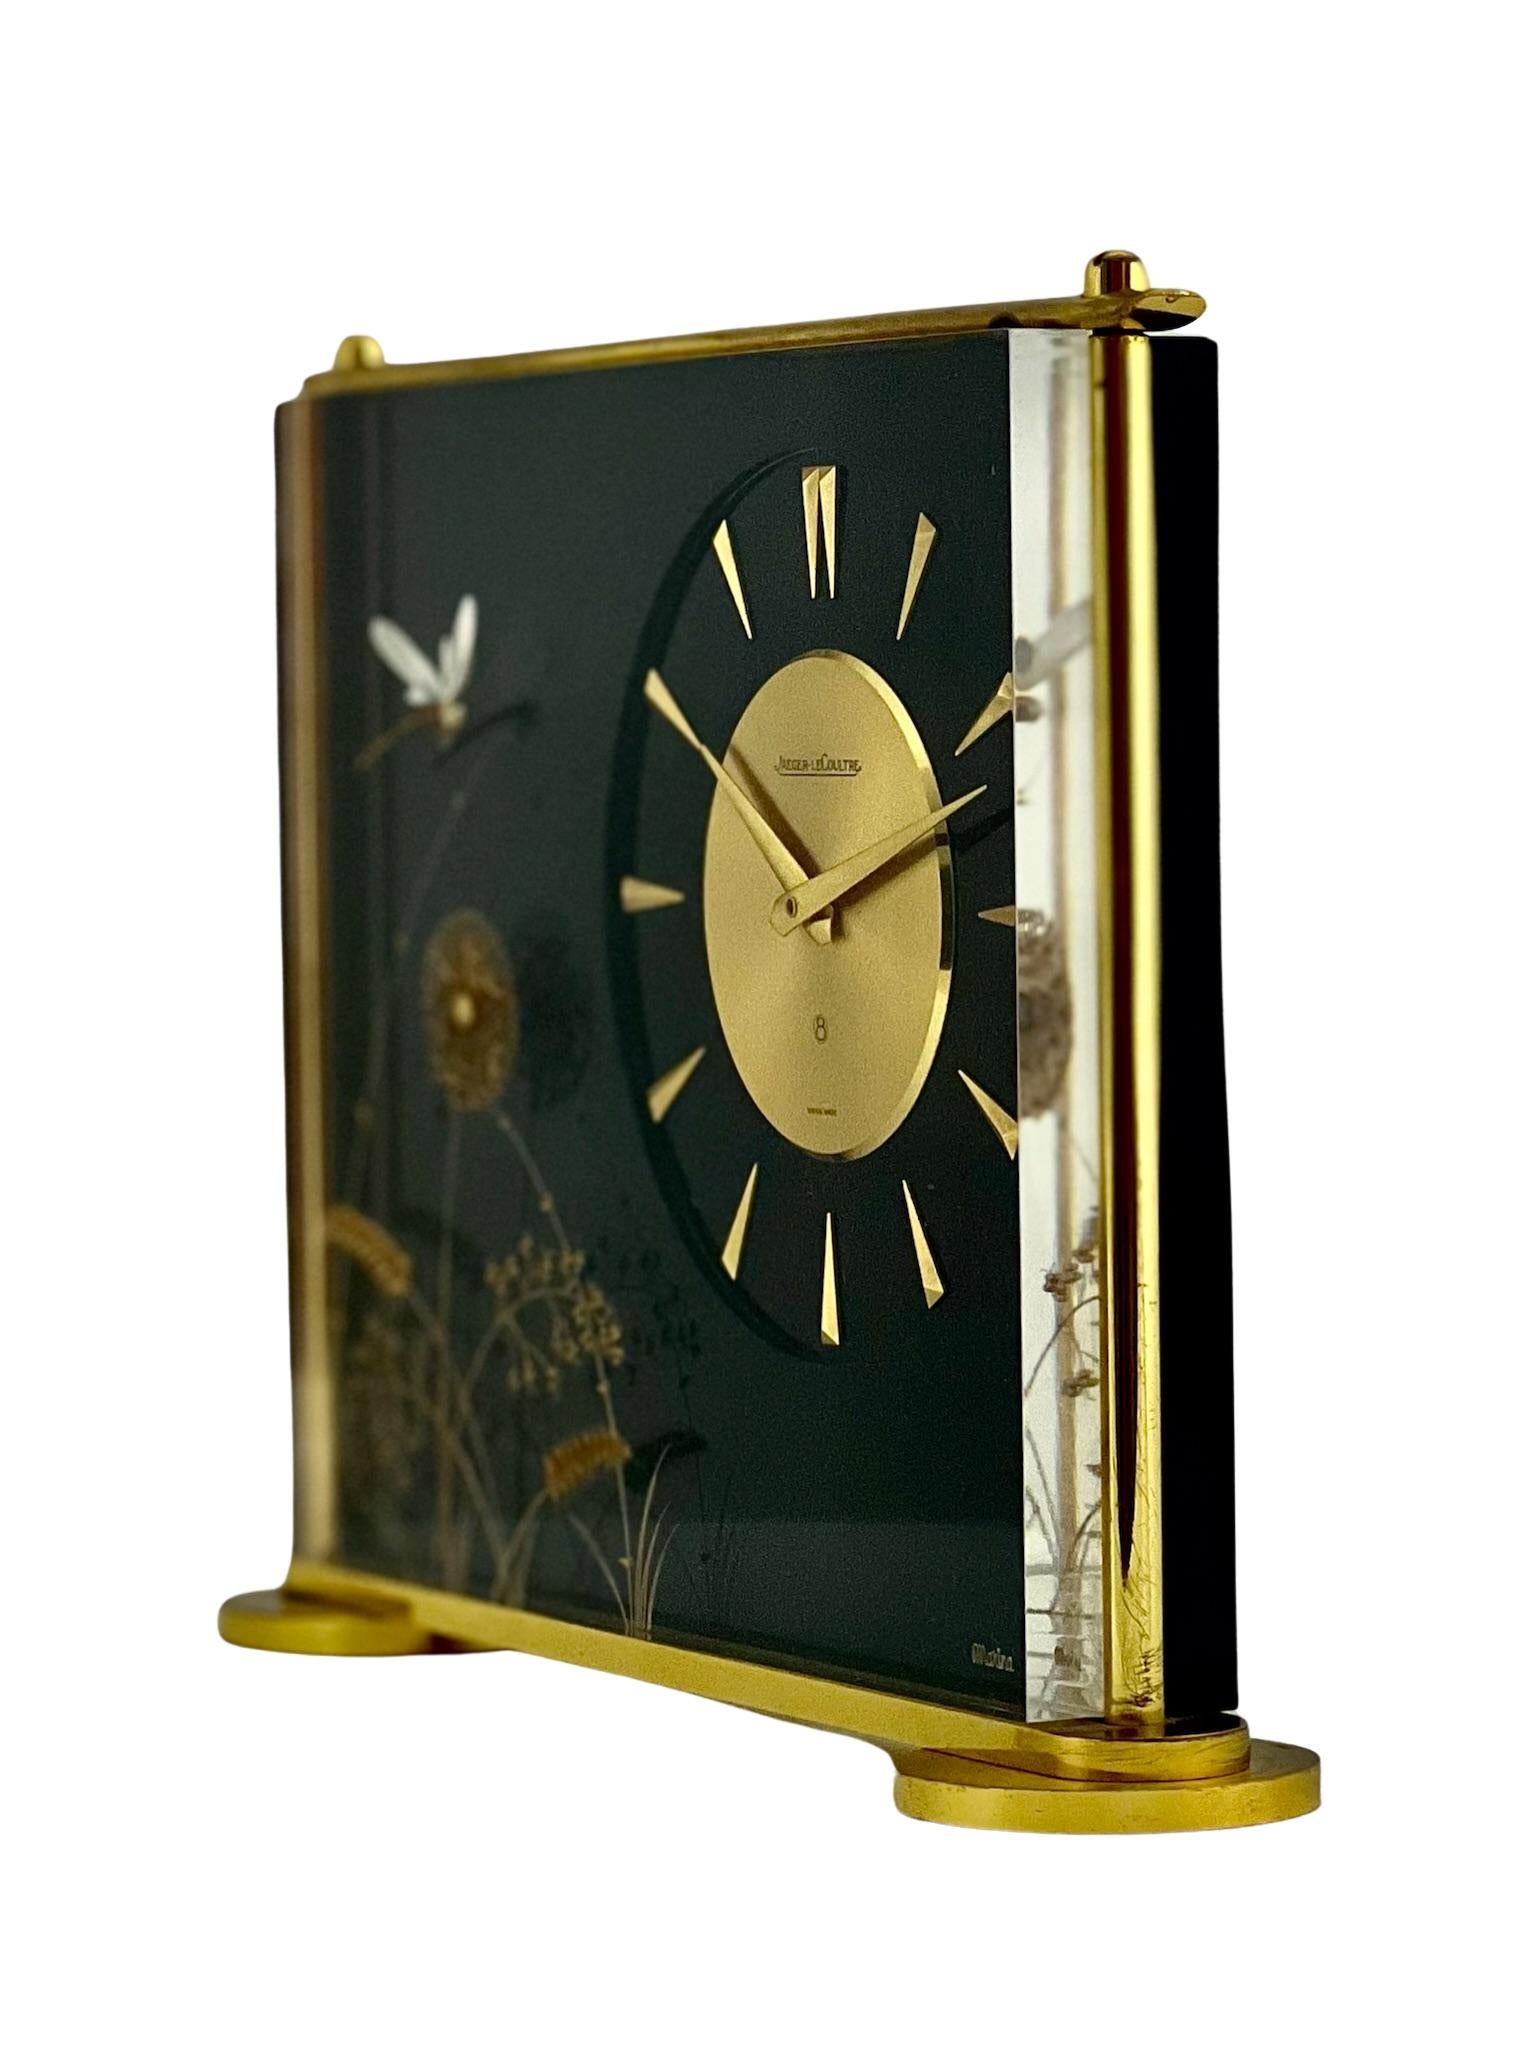 Brass Jaeger LeCoultre Mid Century Marina Clock Model No. 486 For Sale